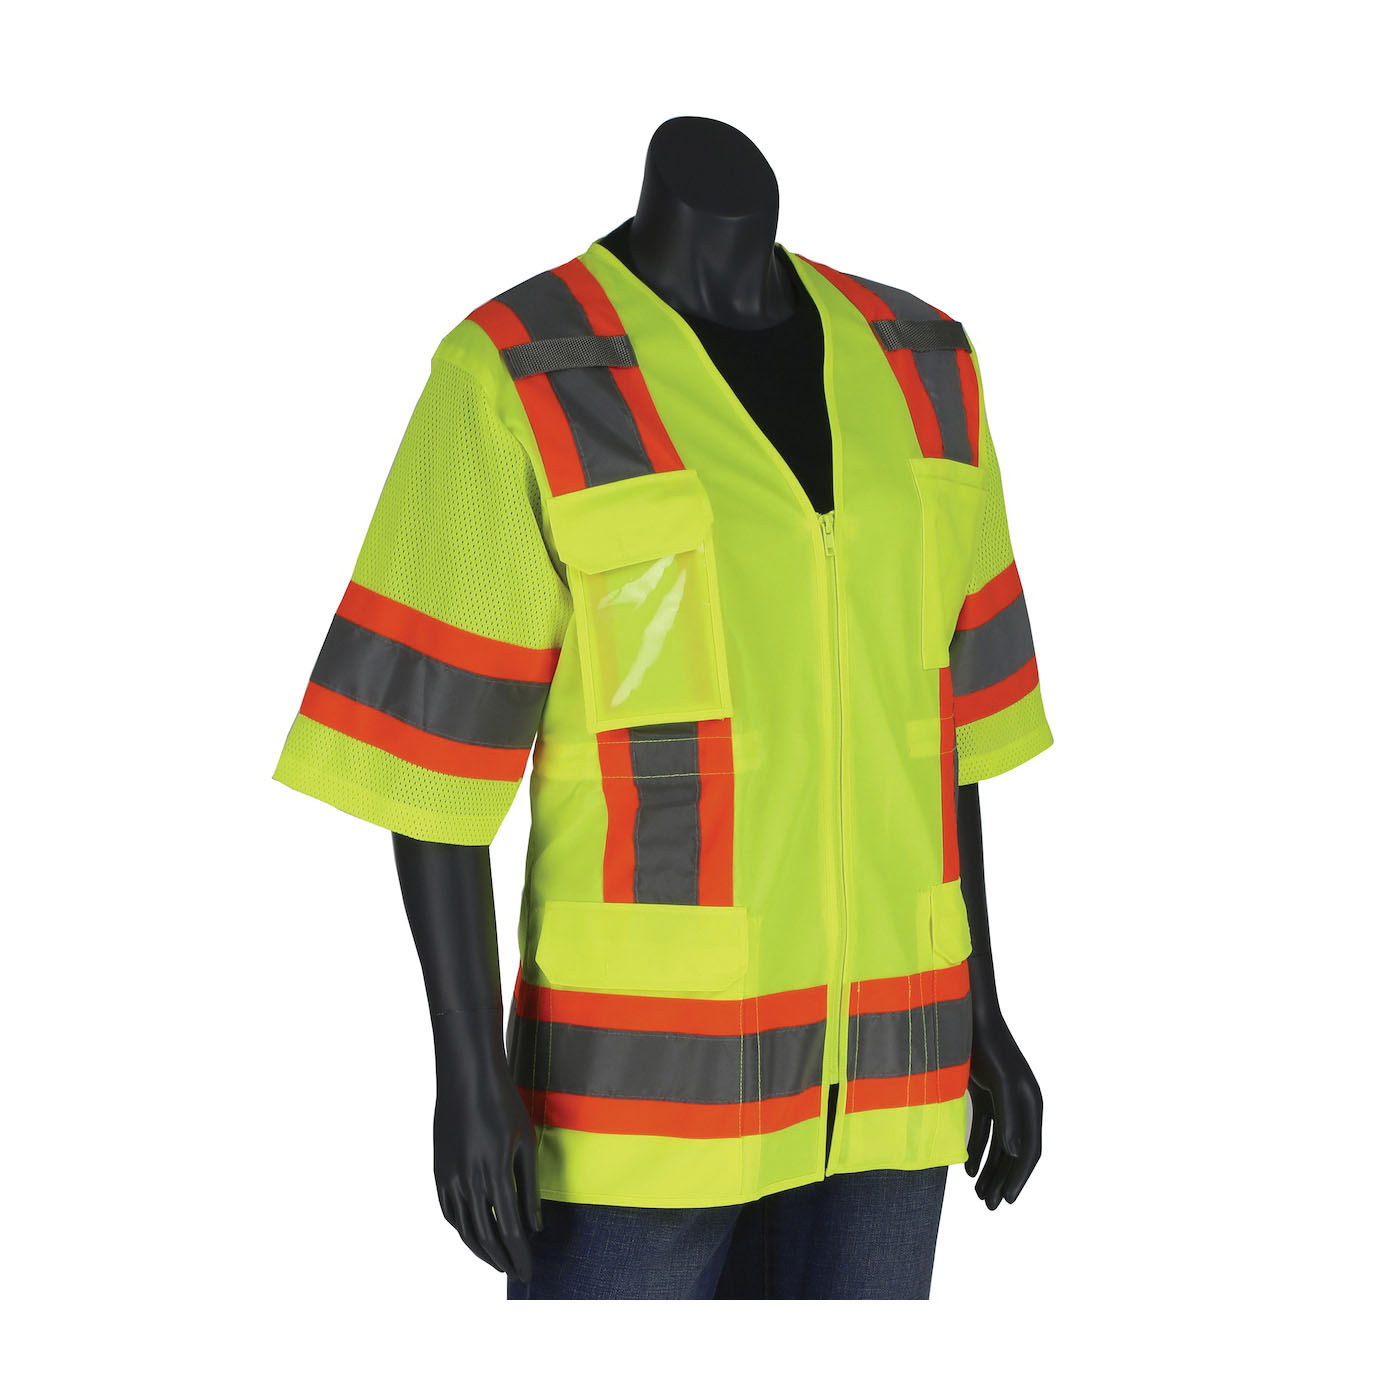 PIP® 303-0513-LY/3X 2-Tone Contoured Surveyor's Vest With Solid Front and Mesh Back, 3XL, Hi-Vis Yellow, 100% Polyester Mesh/Solid Tricot Knit, Zipper Closure, 11 Pockets, ANSI Class: Type/Class R3